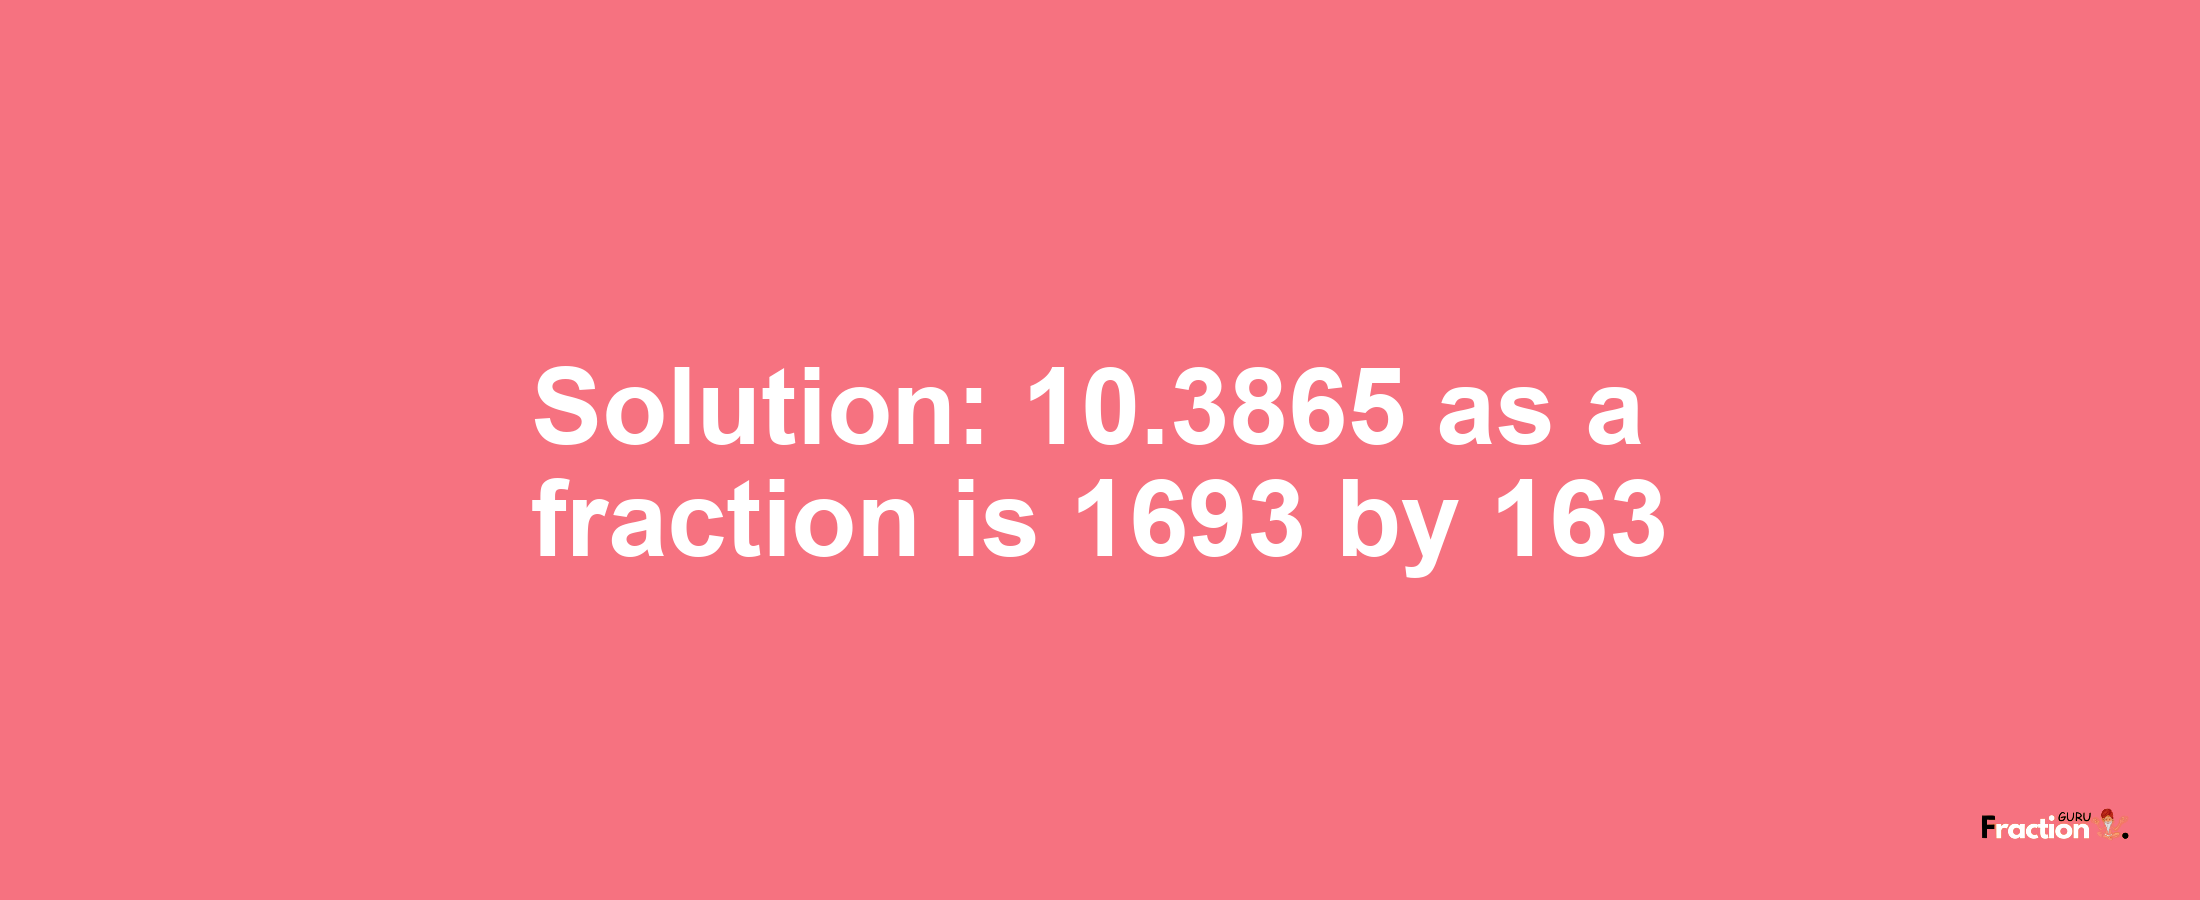 Solution:10.3865 as a fraction is 1693/163